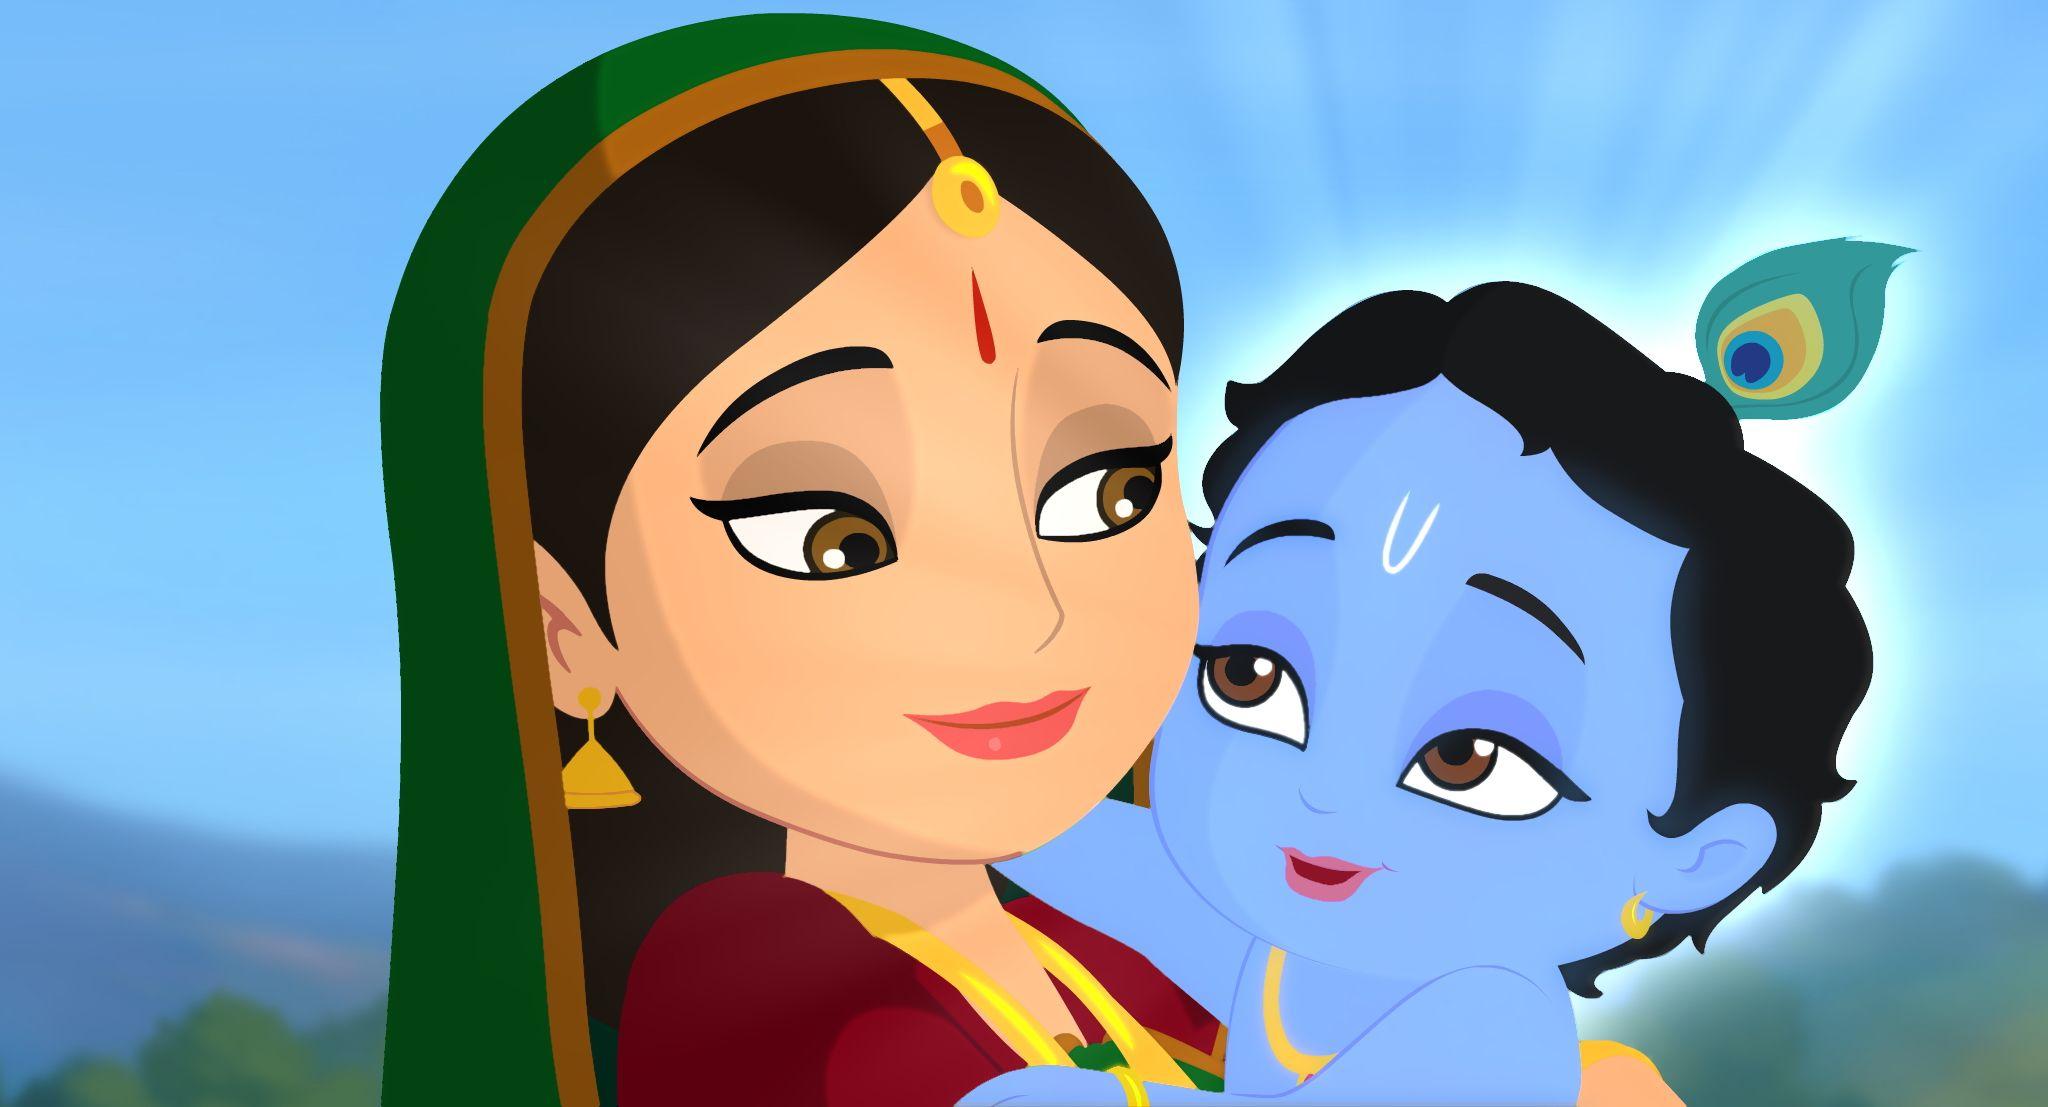 Animated Cute Little Krishna Images Hd - Admin on kayley the club.